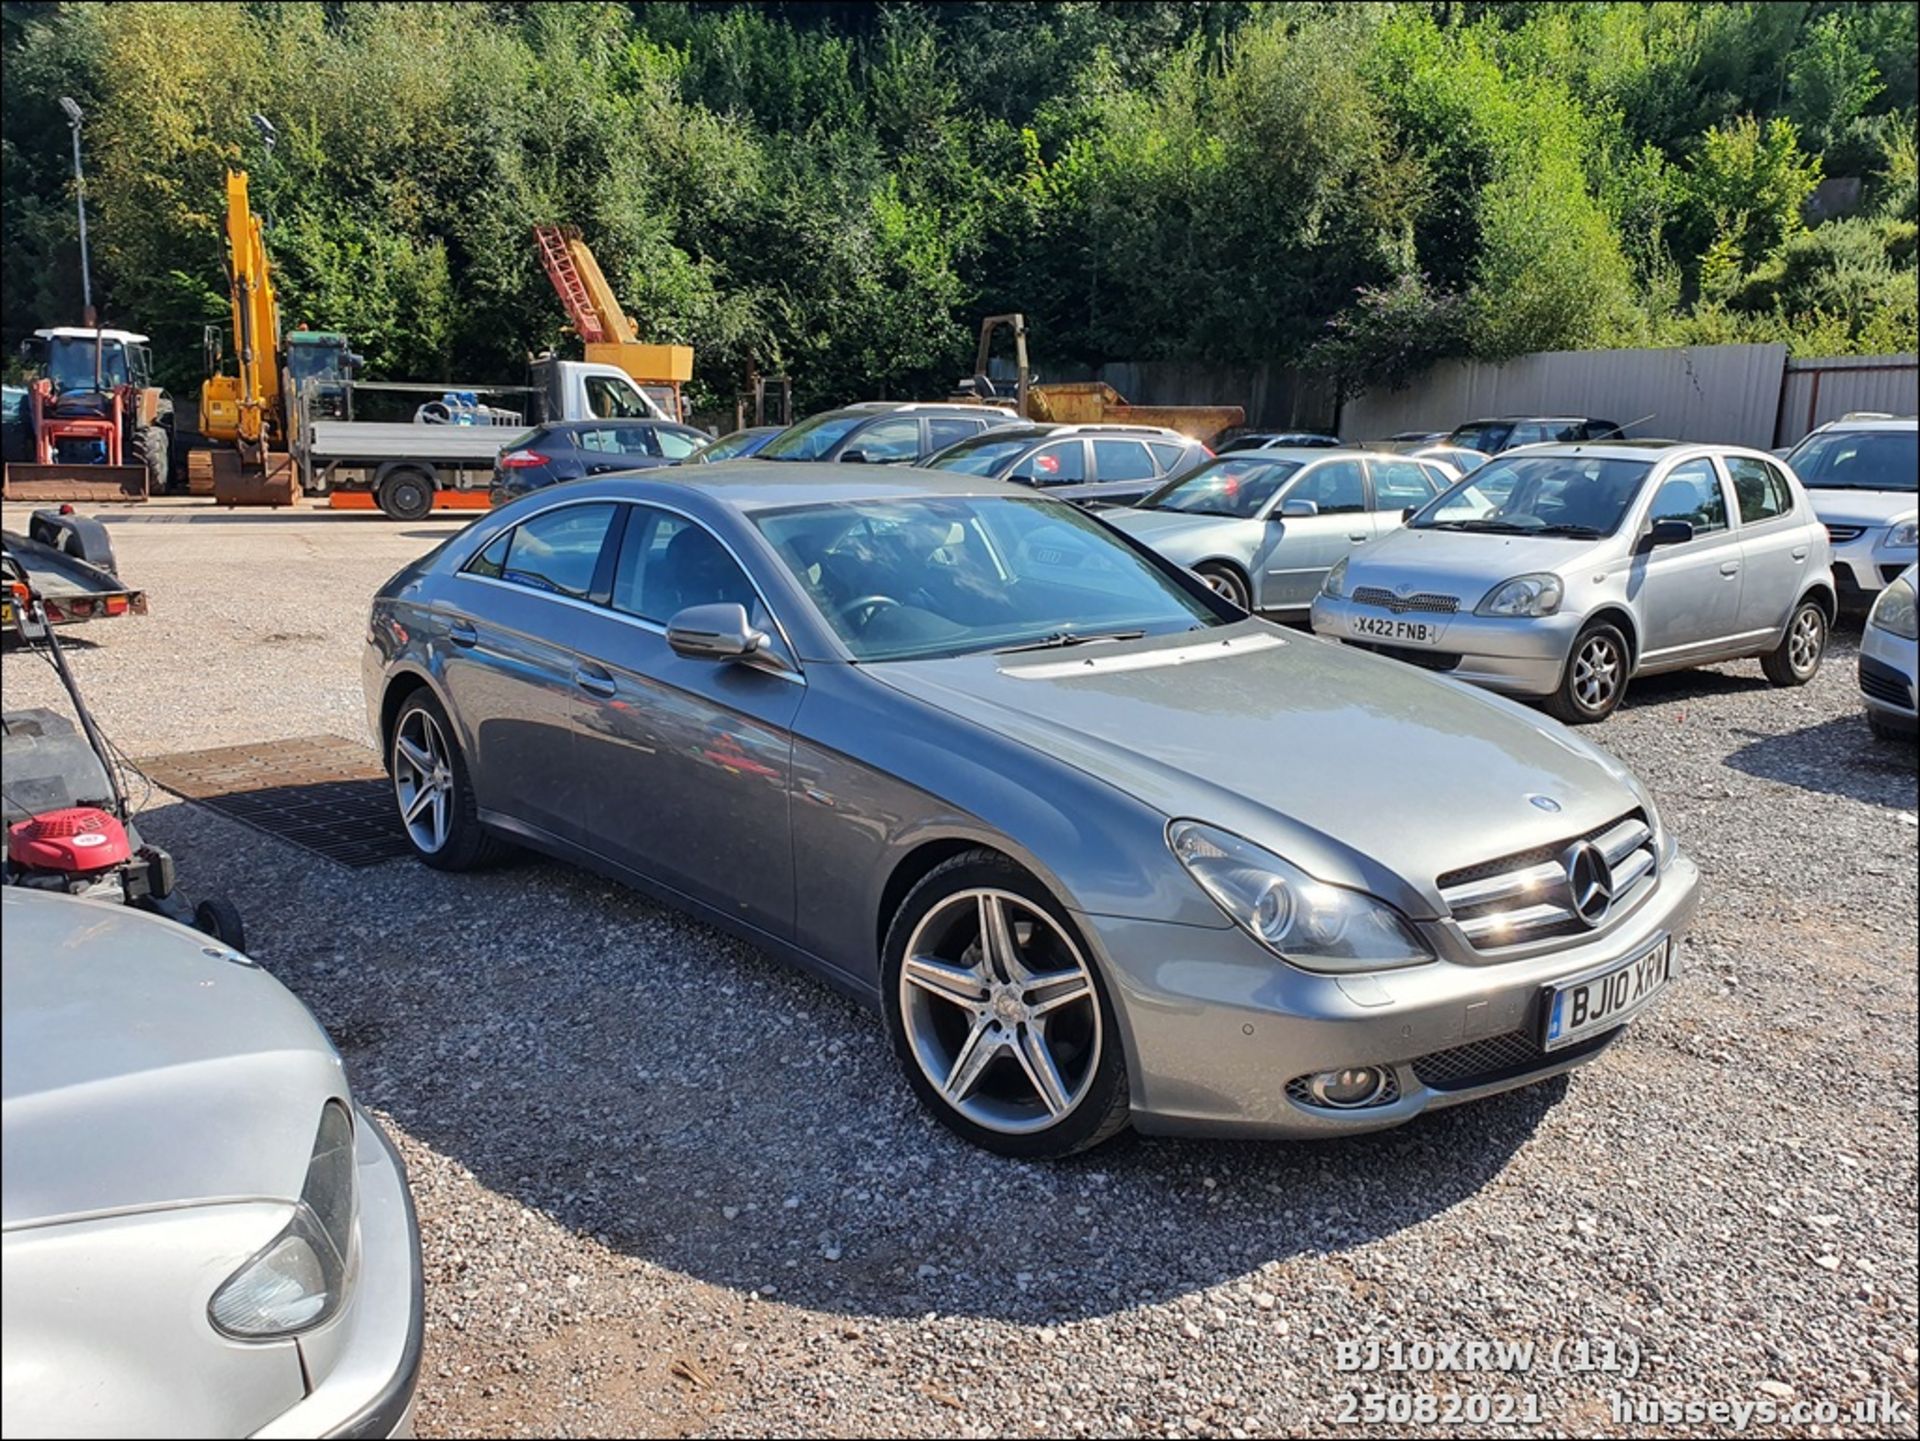 10/10 MERCEDES-BENZ CLS350 GRAND EDIT-N CDI A - 2987cc 2dr Coupe (Silver)